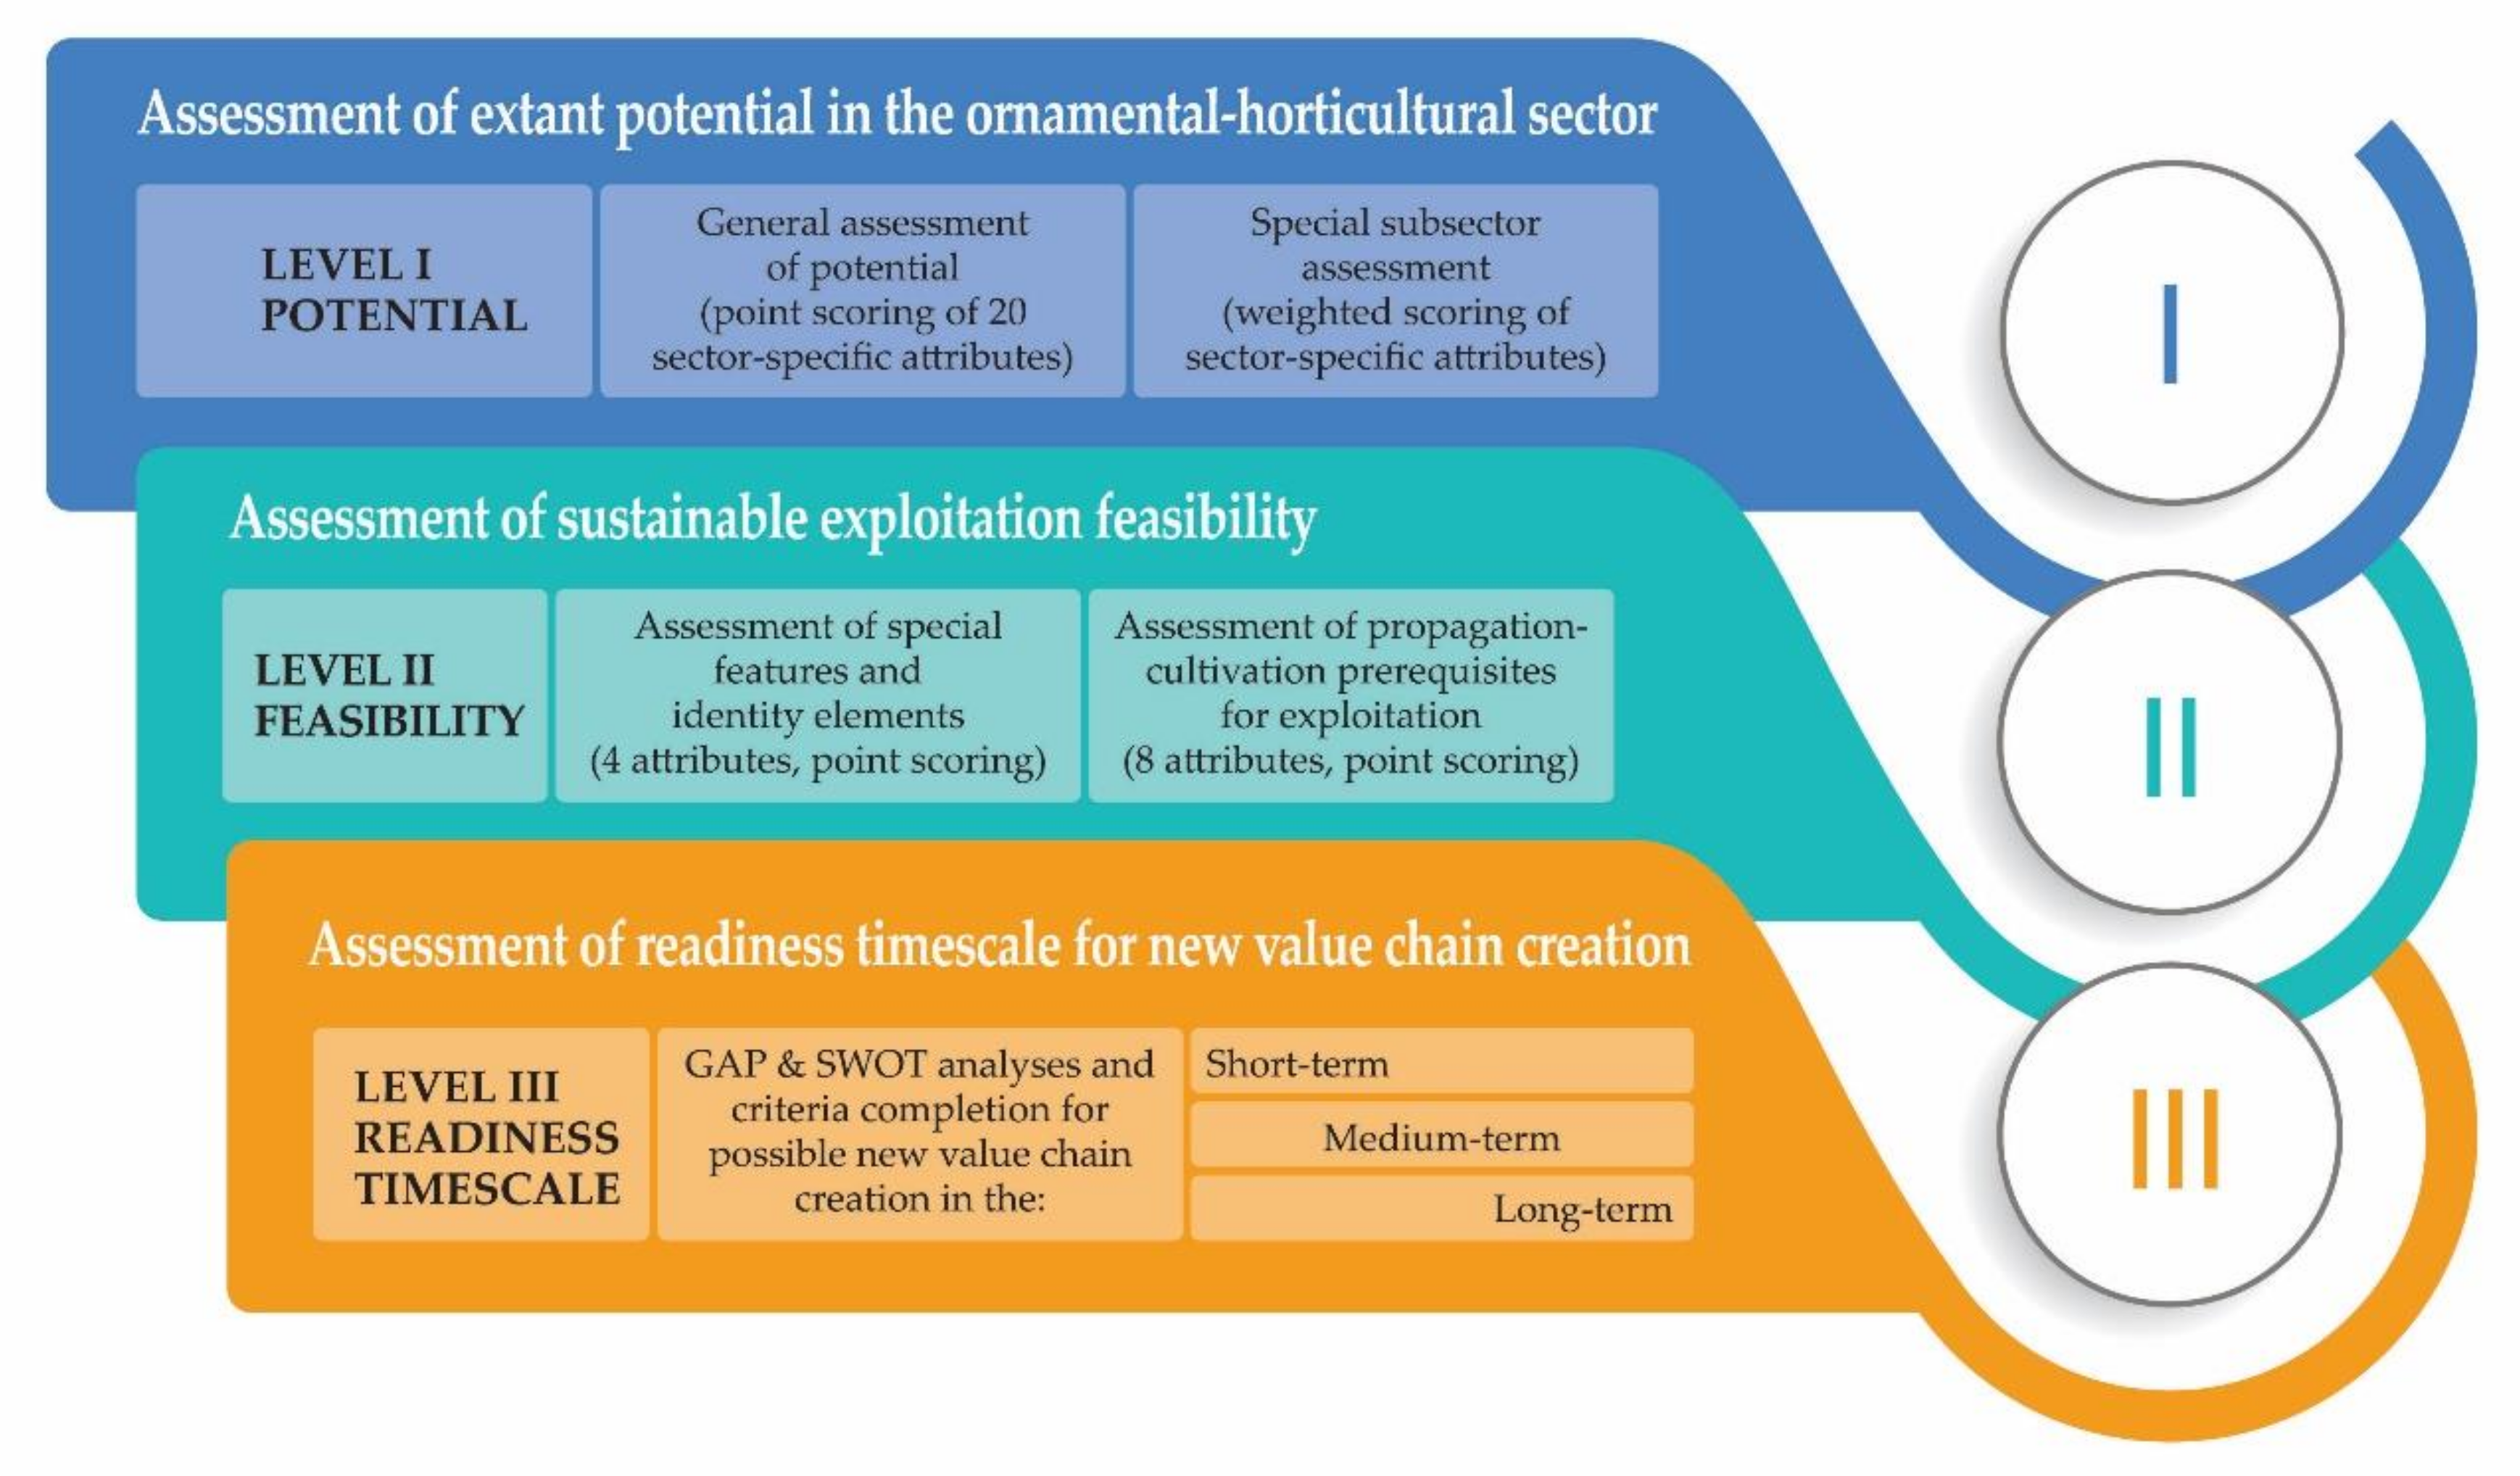 Sustainability | Free Full-Text | Exploring the Potential of Neglected  Local Endemic Plants of Three Mediterranean Regions in the Ornamental  Sector: Value Chain Feasibility and Readiness Timescale for Their  Sustainable Exploitation